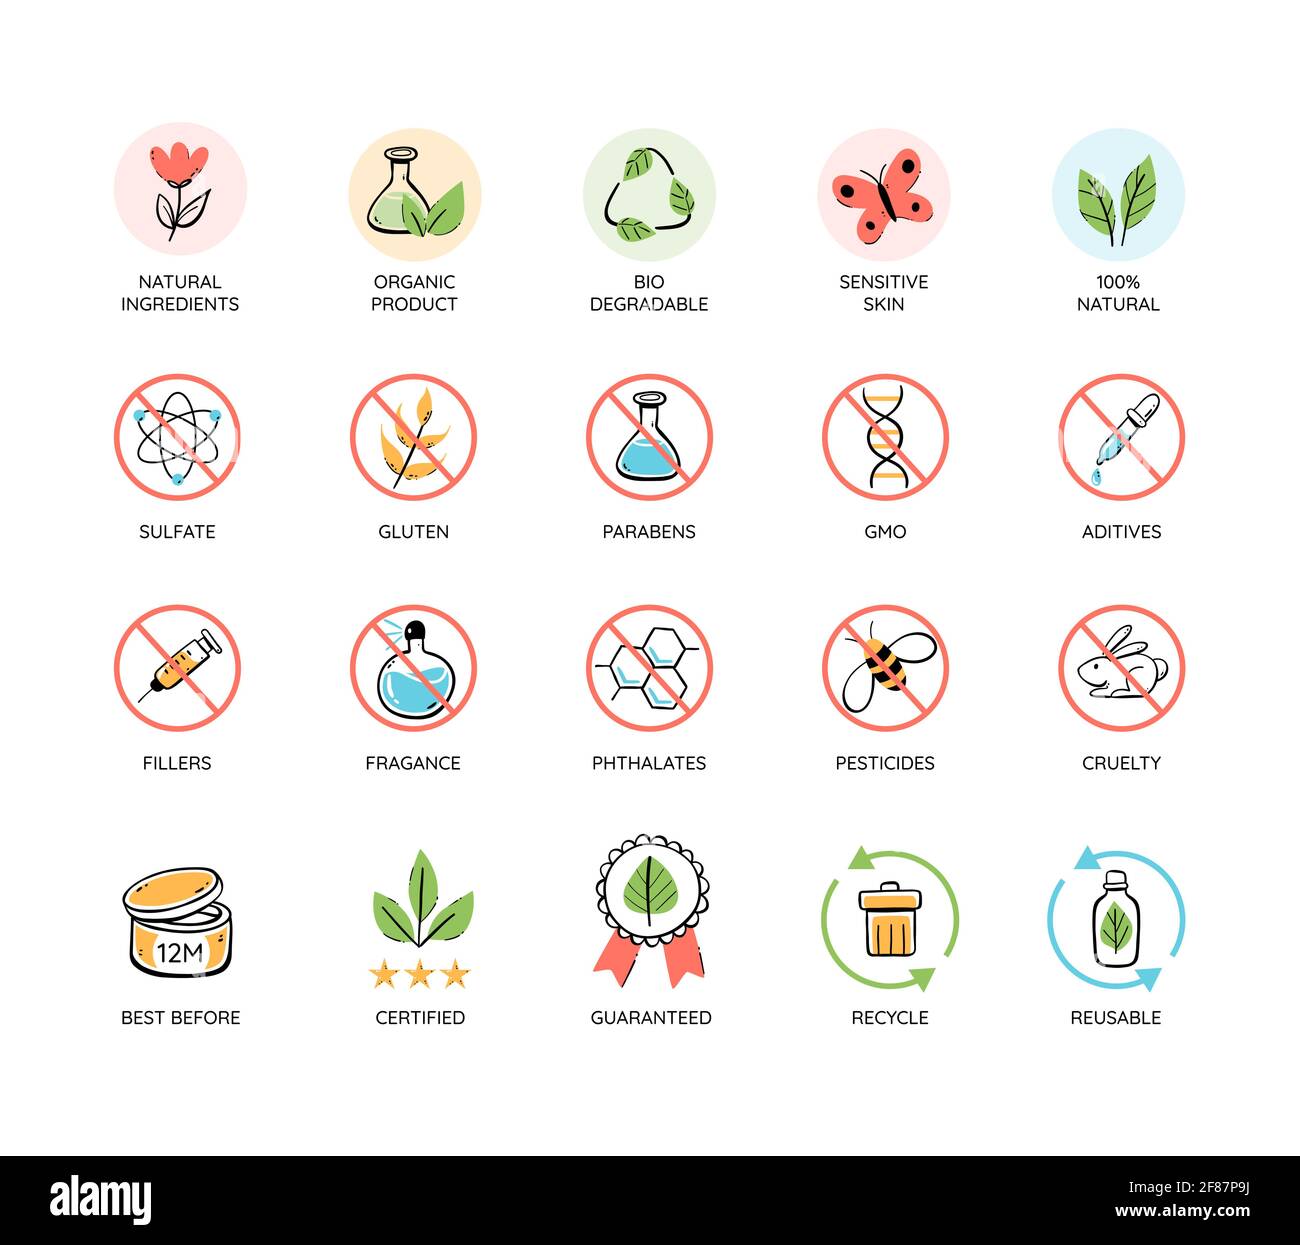 Natural and organic products icon set. Toxic free emblems. No animal tested, natural cosmetic icons. Recycle and reuse. Colorful vector illustration. Stock Vector